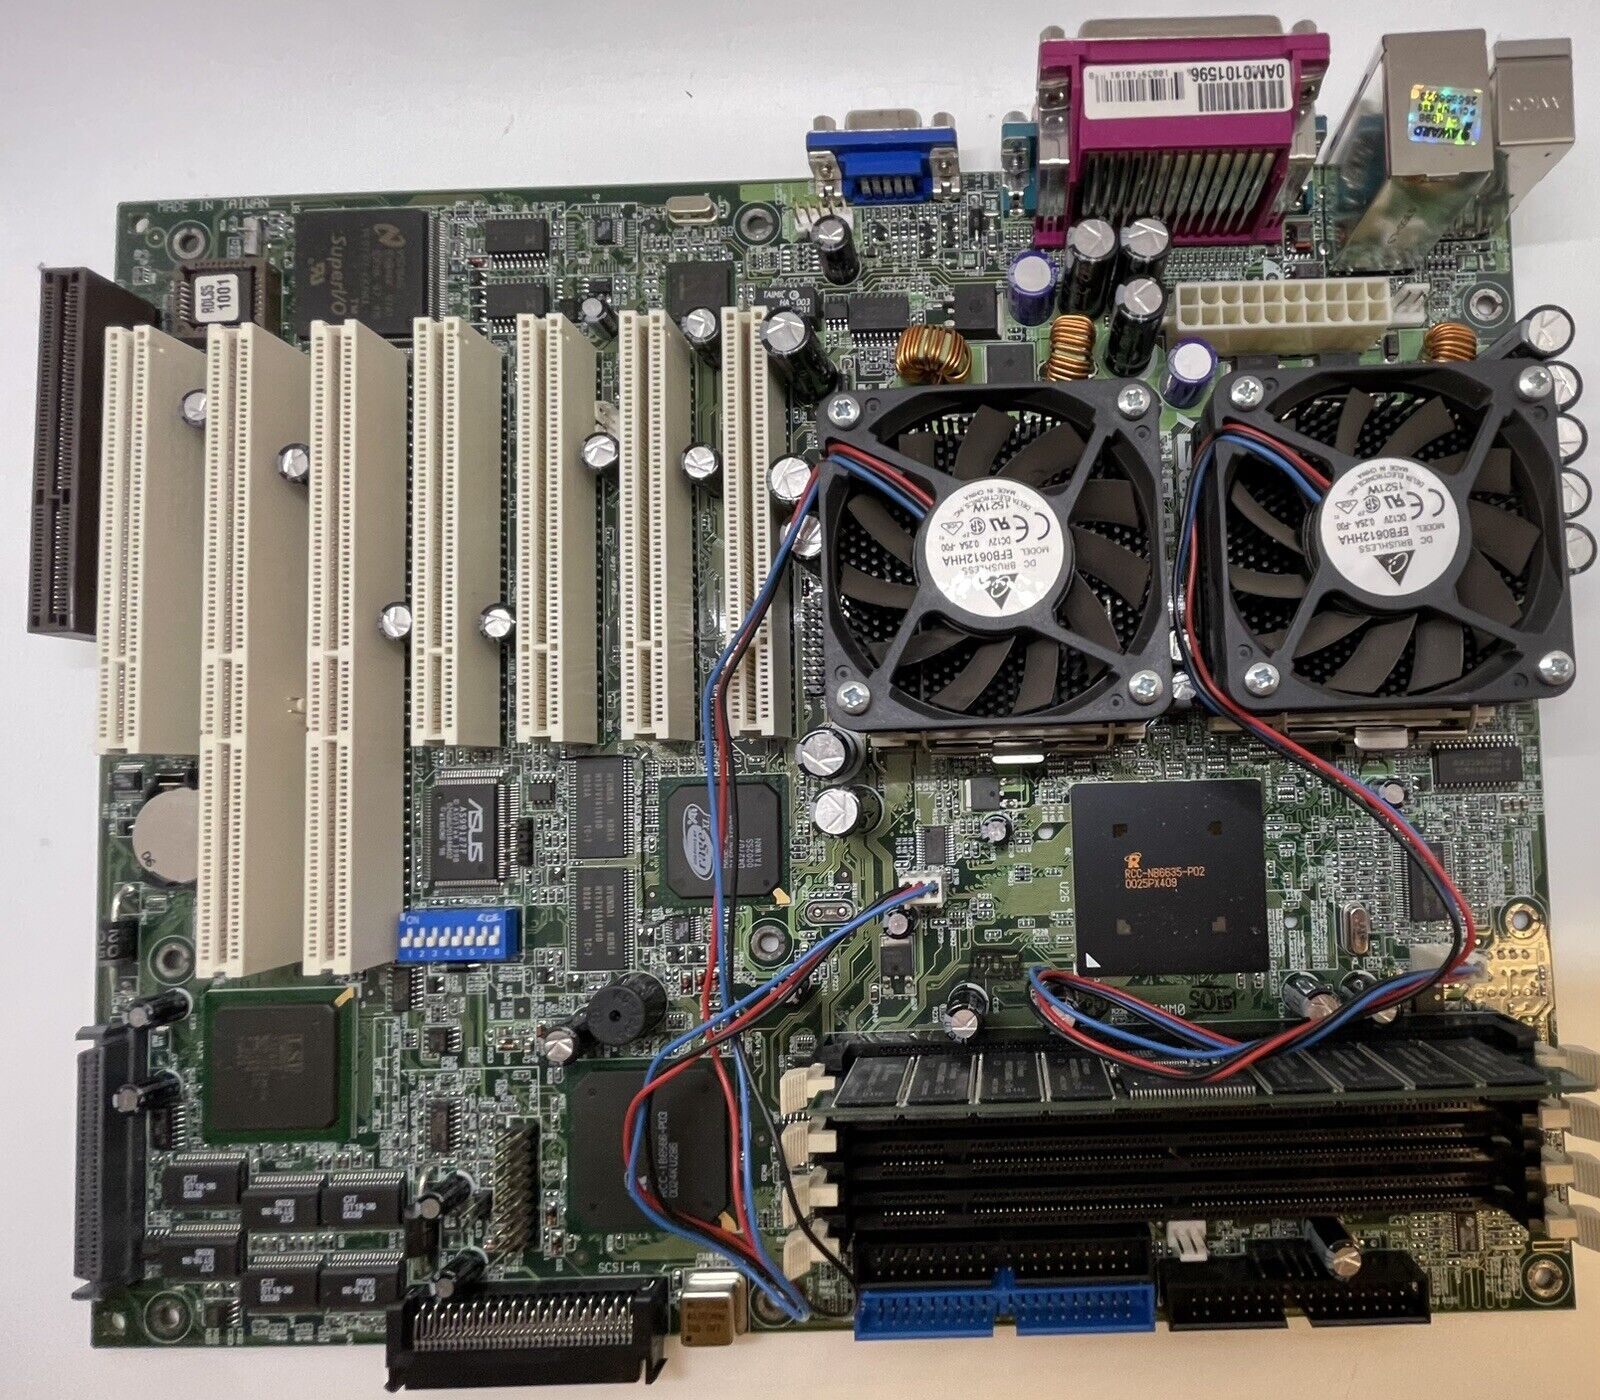 Asus CUR-DLS Dual Pentium III Dual 733 MHZ 133FSB Motherboard with 512MB RAM